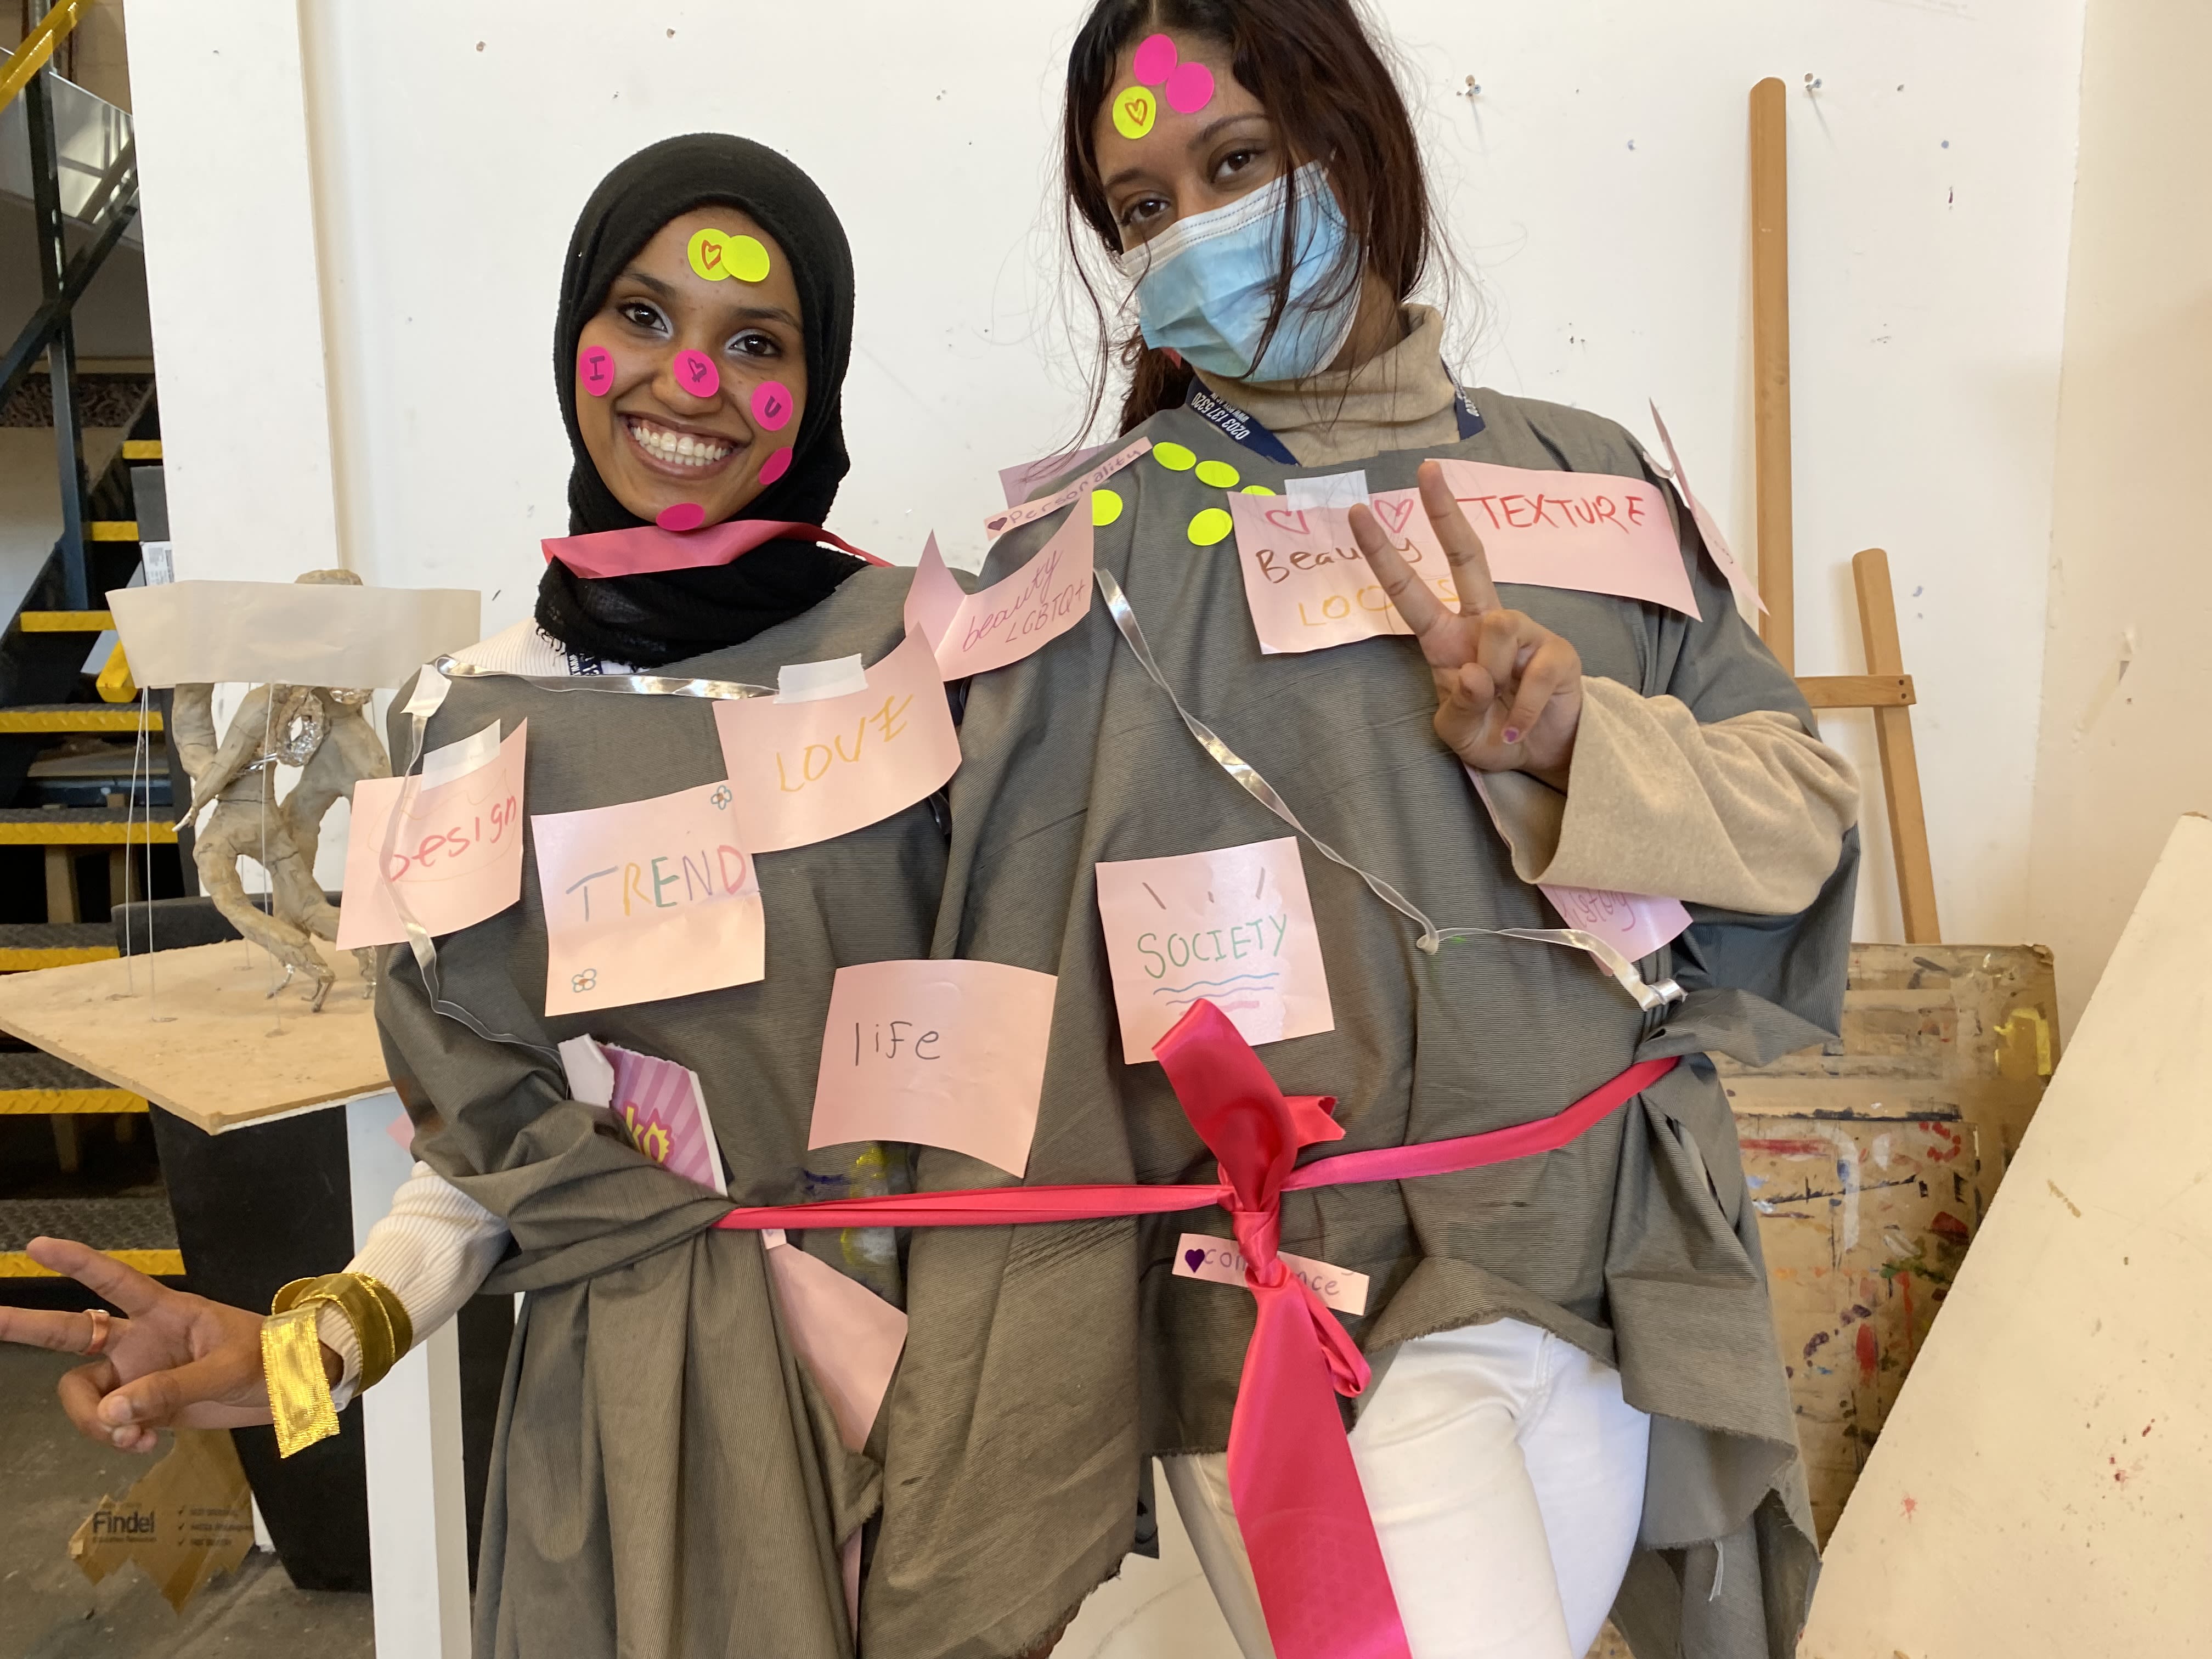 Two students with postit notes on their bodies